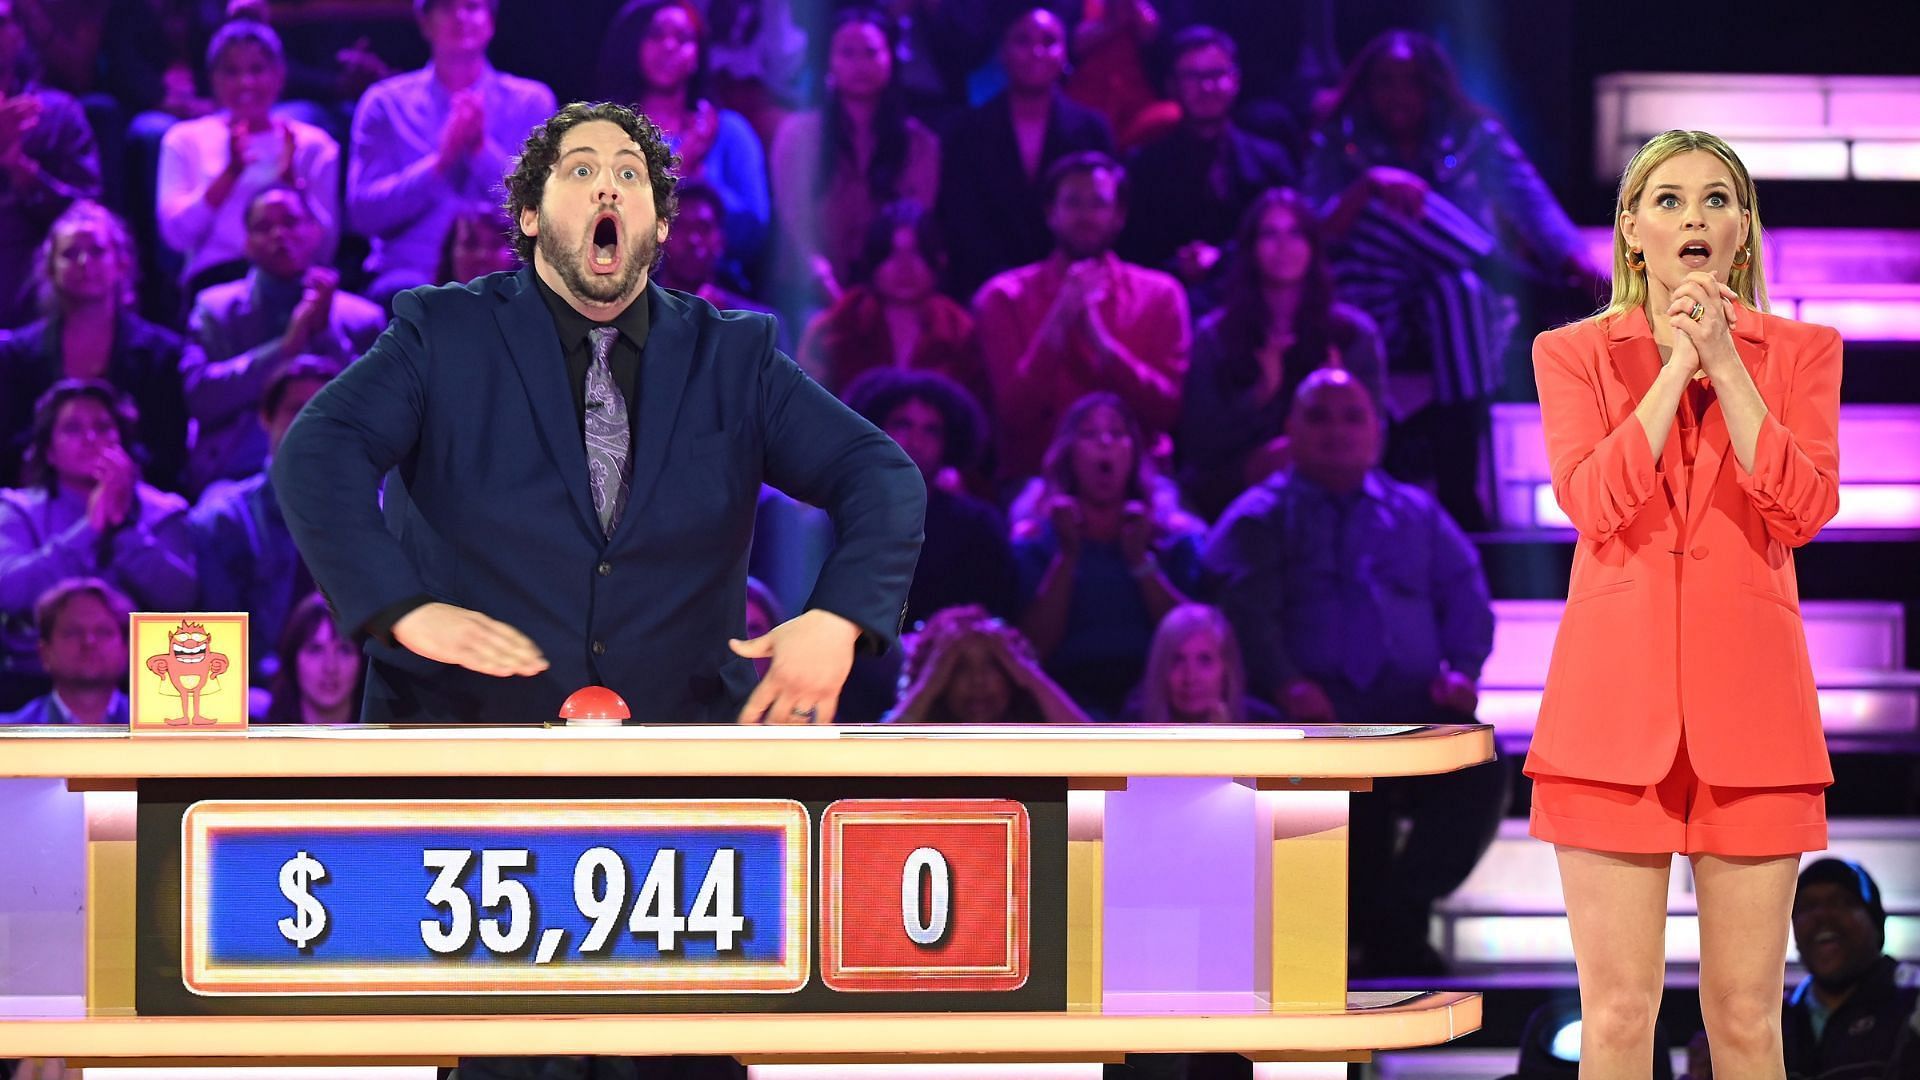 Zach falls short of becoming a millionaire on Press Your Luck (Image via tvpressyourluck/Instagram)